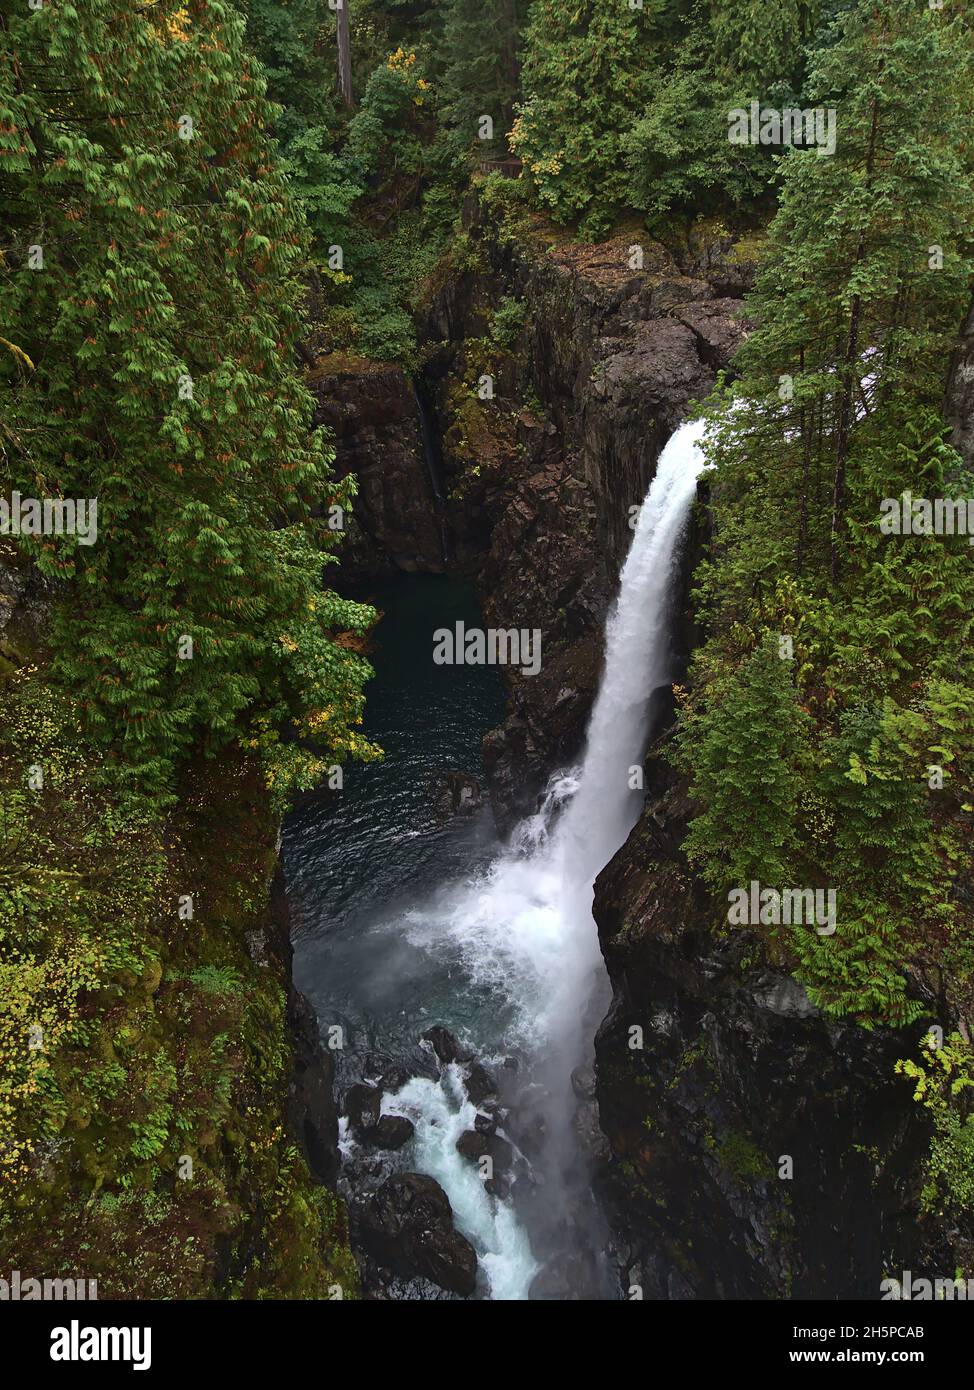 High angle view of waterfall Elk Falls located in Provincial Park near Campbell River on Vancouver Island, British Columbia, Canada in gorge. Stock Photo